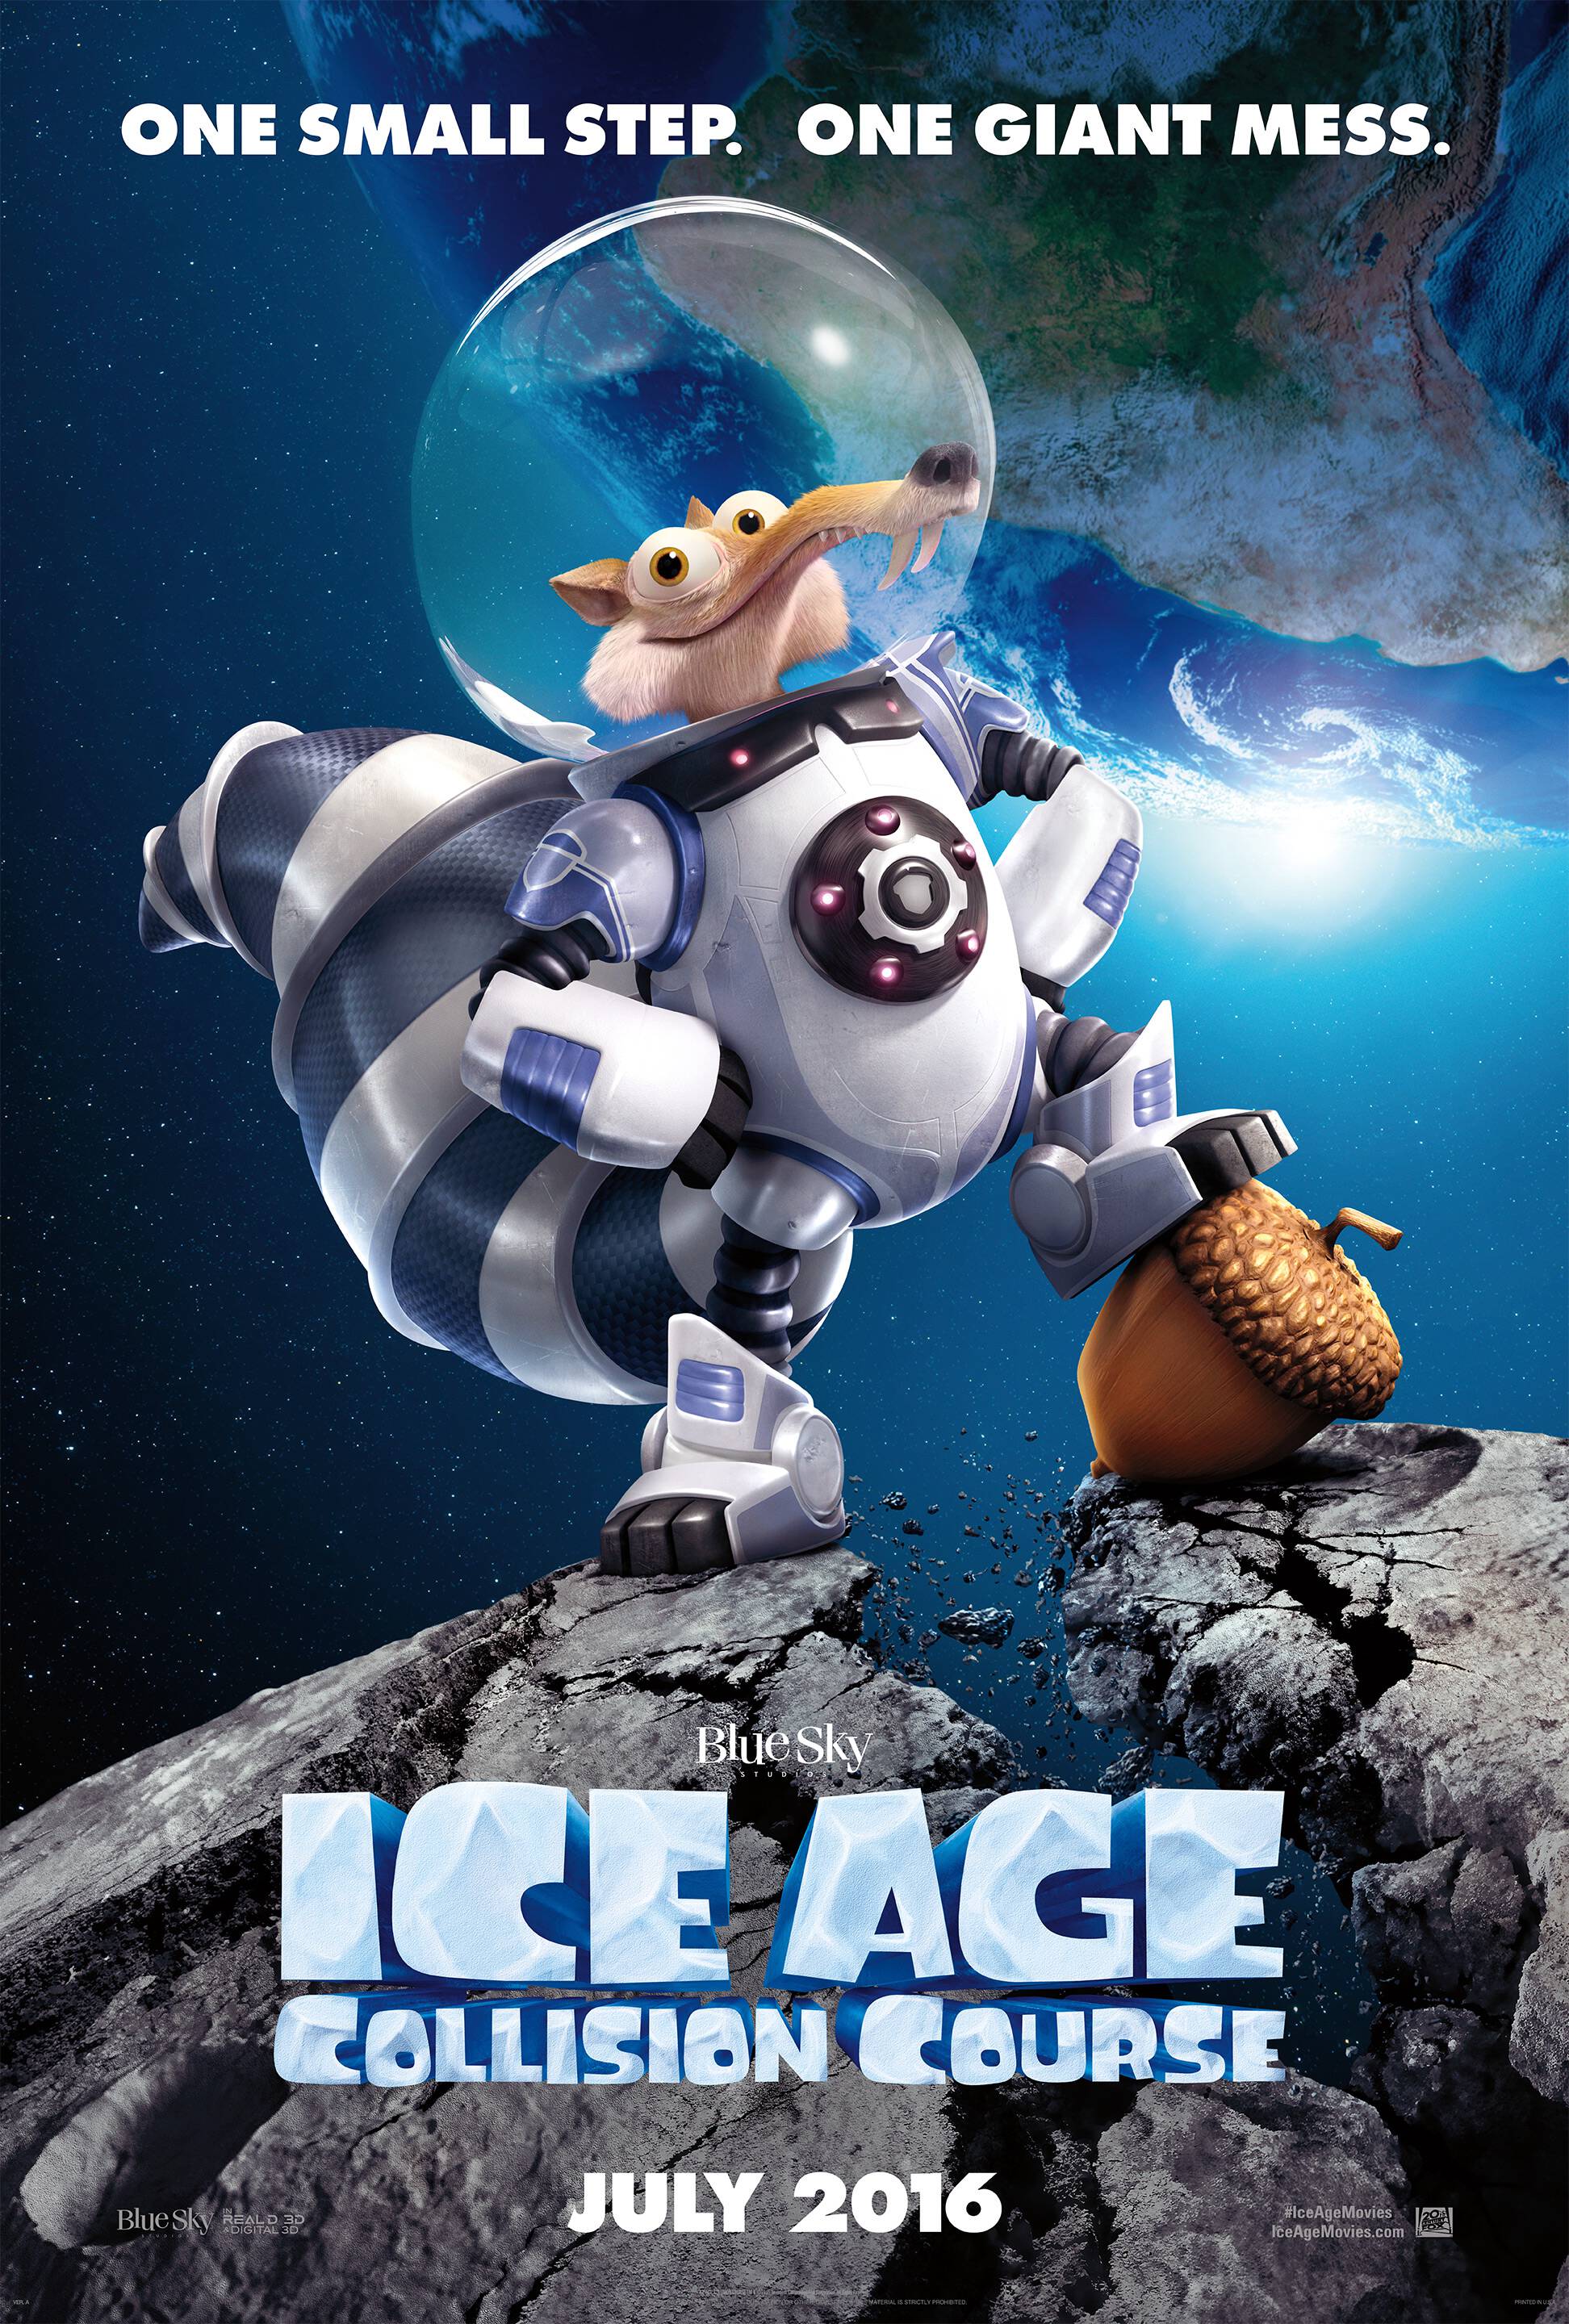 Check out the ICE AGE: COLLISION COURSE trailer and photos that just released! This movie looks so fun, and it hits theaters July 22, 2016!